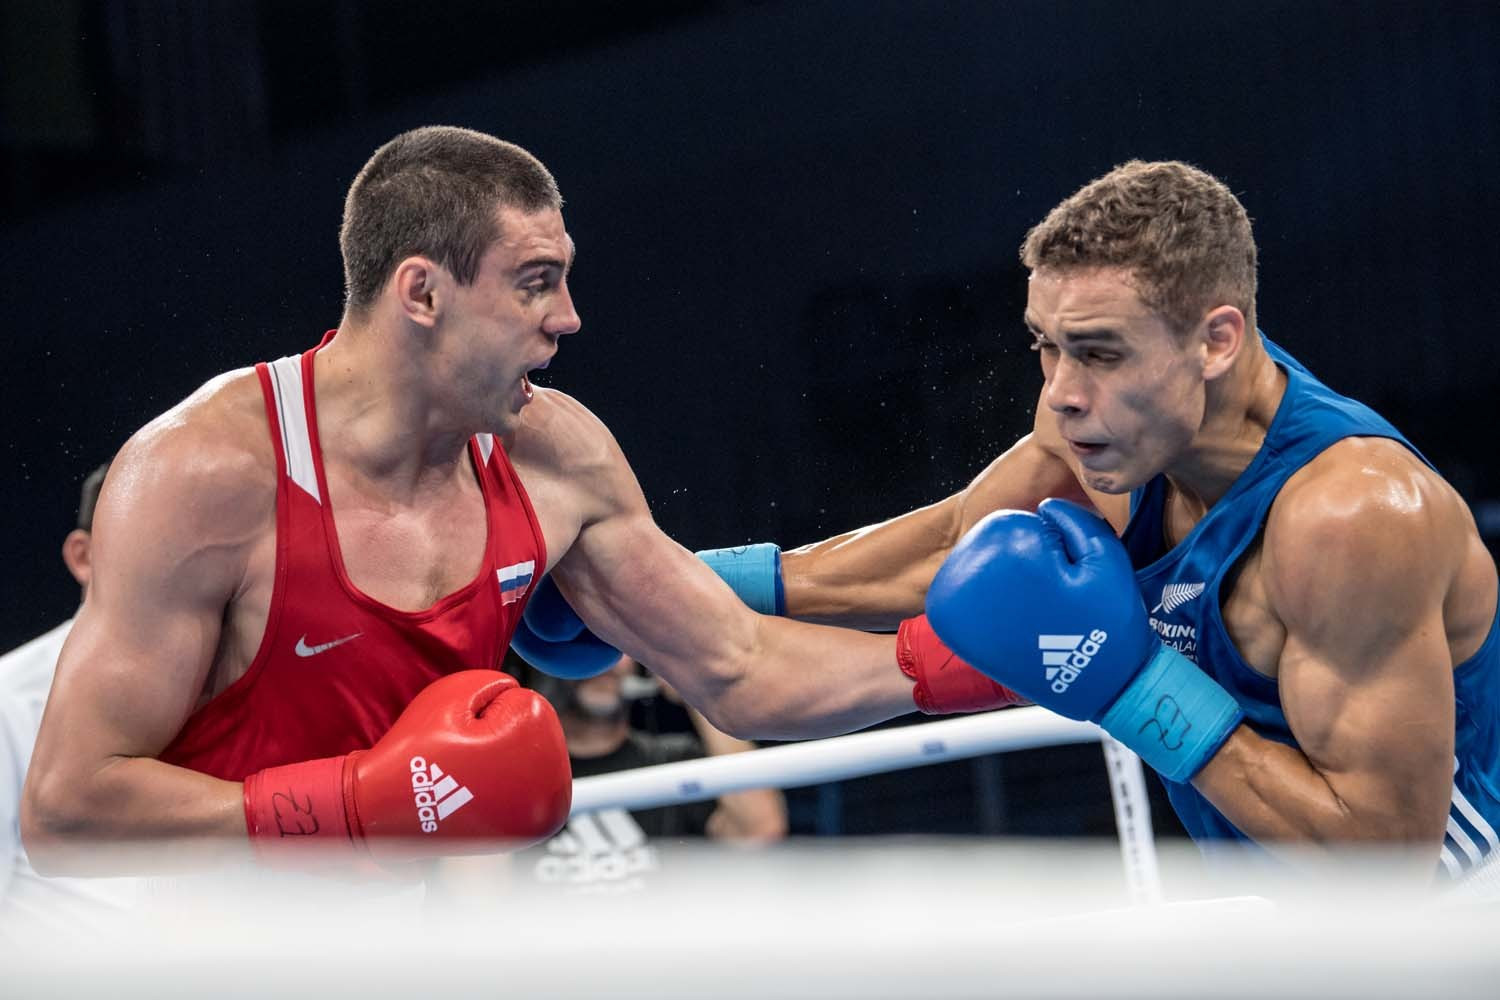 World and Olympic heavyweight champion Evgeny Tishchenko of Russia saw off the challenge of New Zealand's David Nyika to progress through to the last four ©AIBA